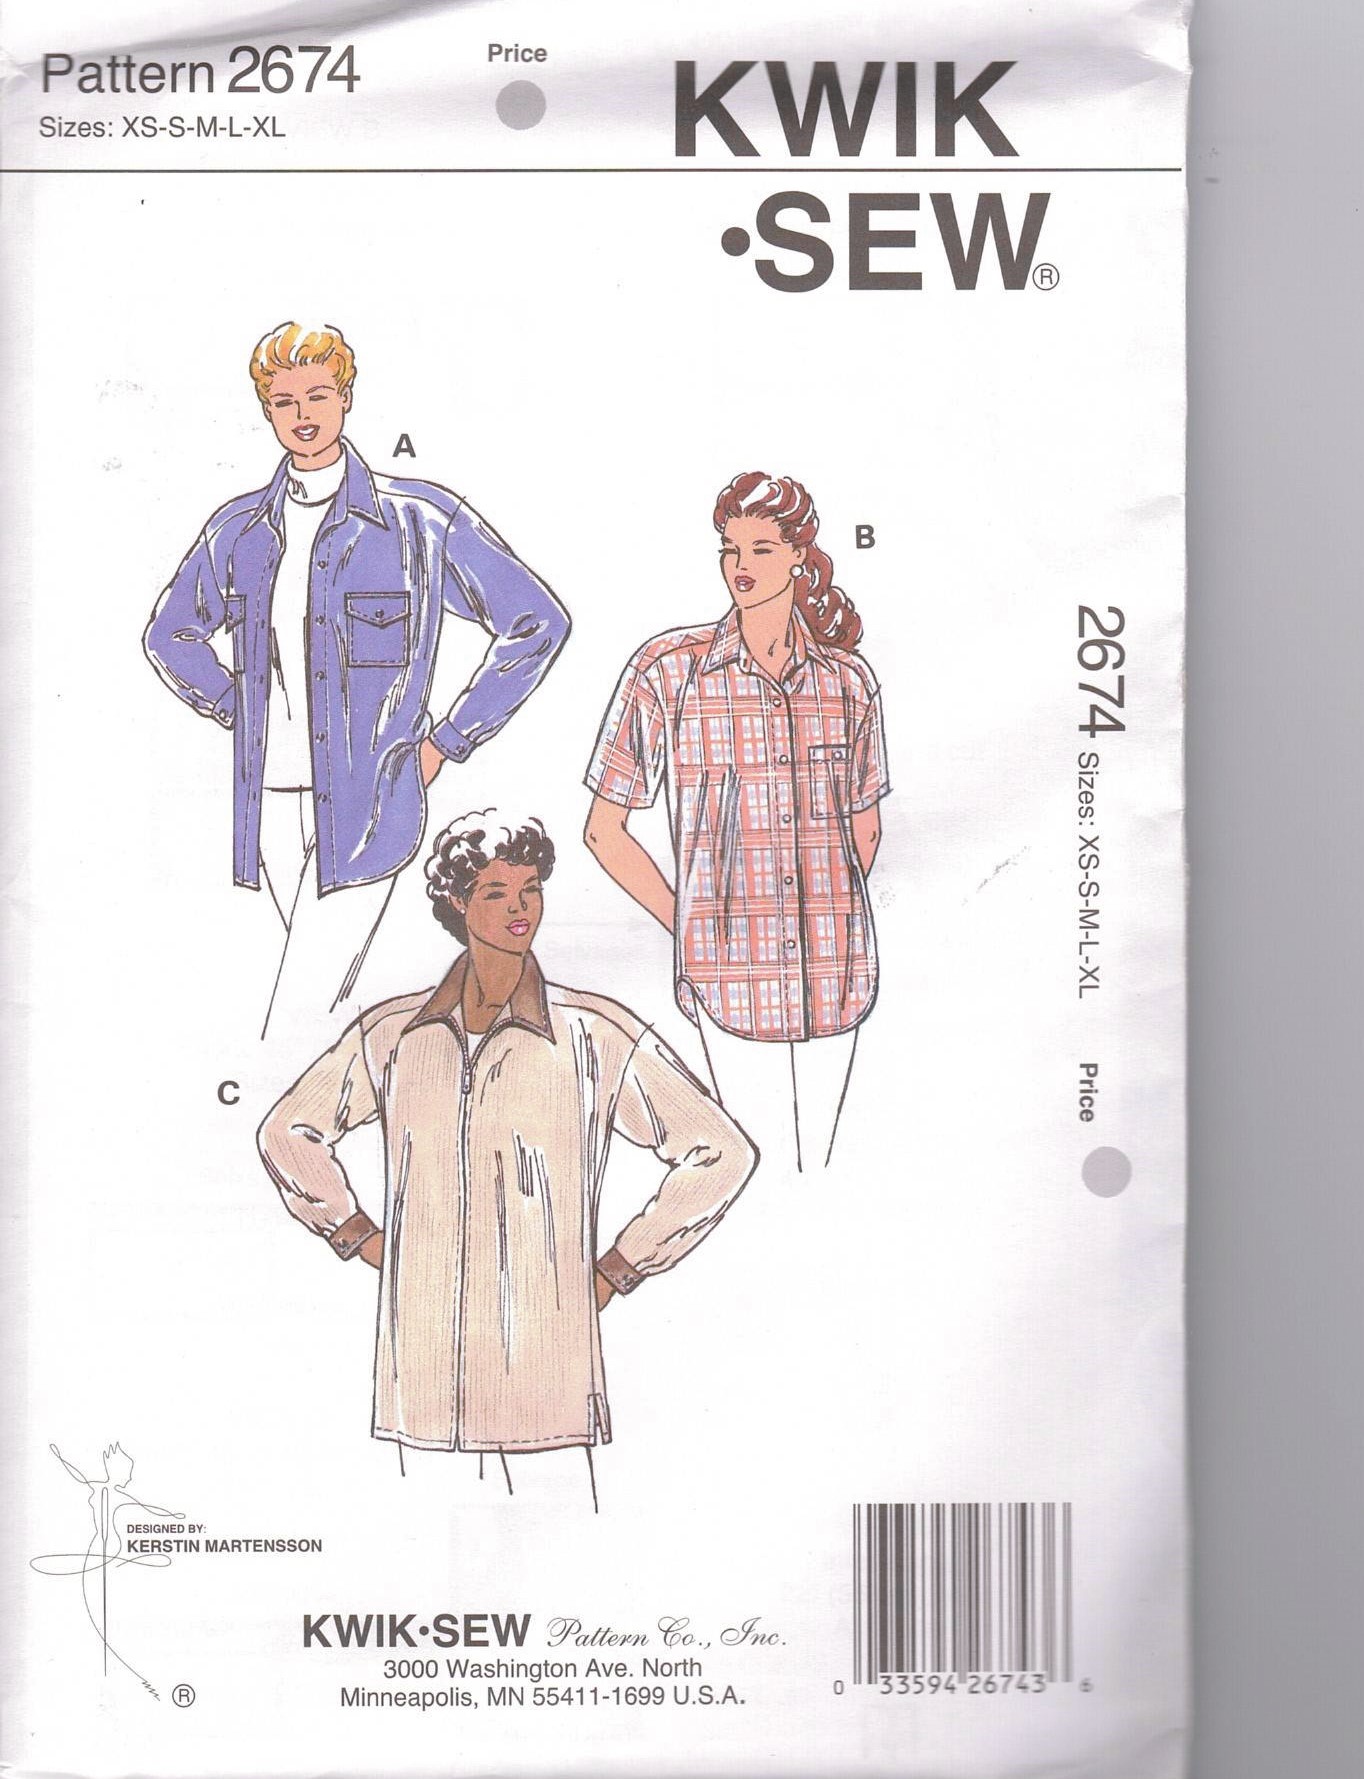 Kwik Sew Pattern 2674 Loose Fitting Shirts in three views for Misses sizes  Extra Small through Extra Large